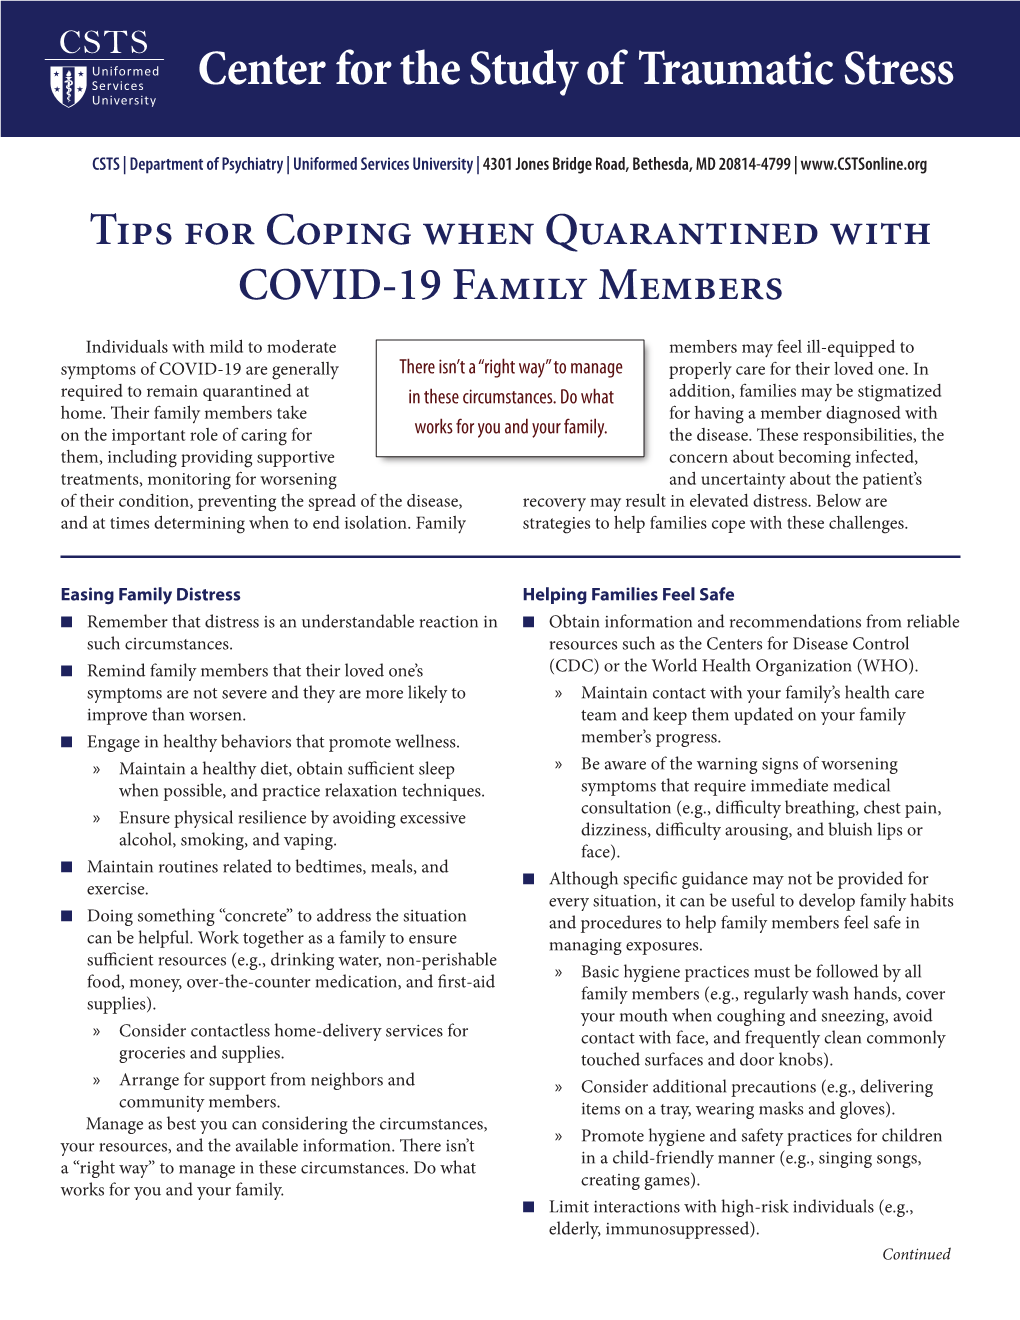 Tips for Coping When Quarantined with COVID-19 Family Members